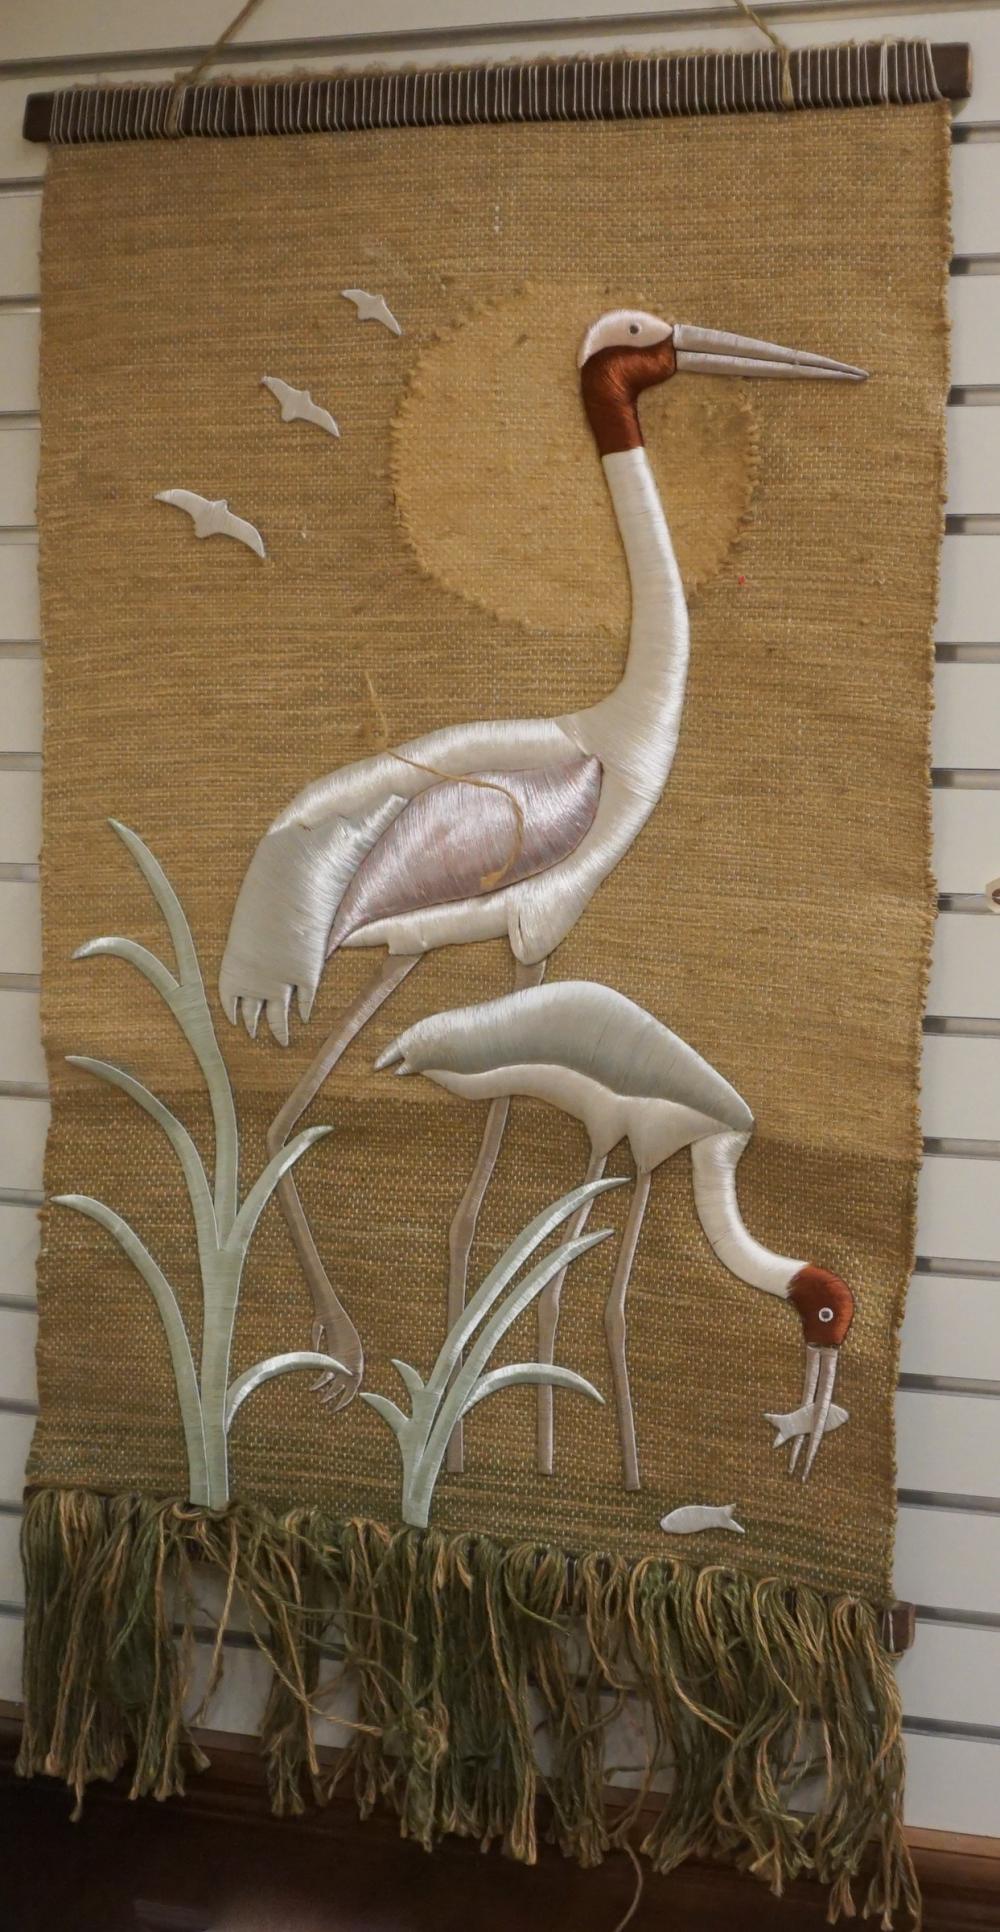 WOVEN WALL HANGING OF CRANES AND